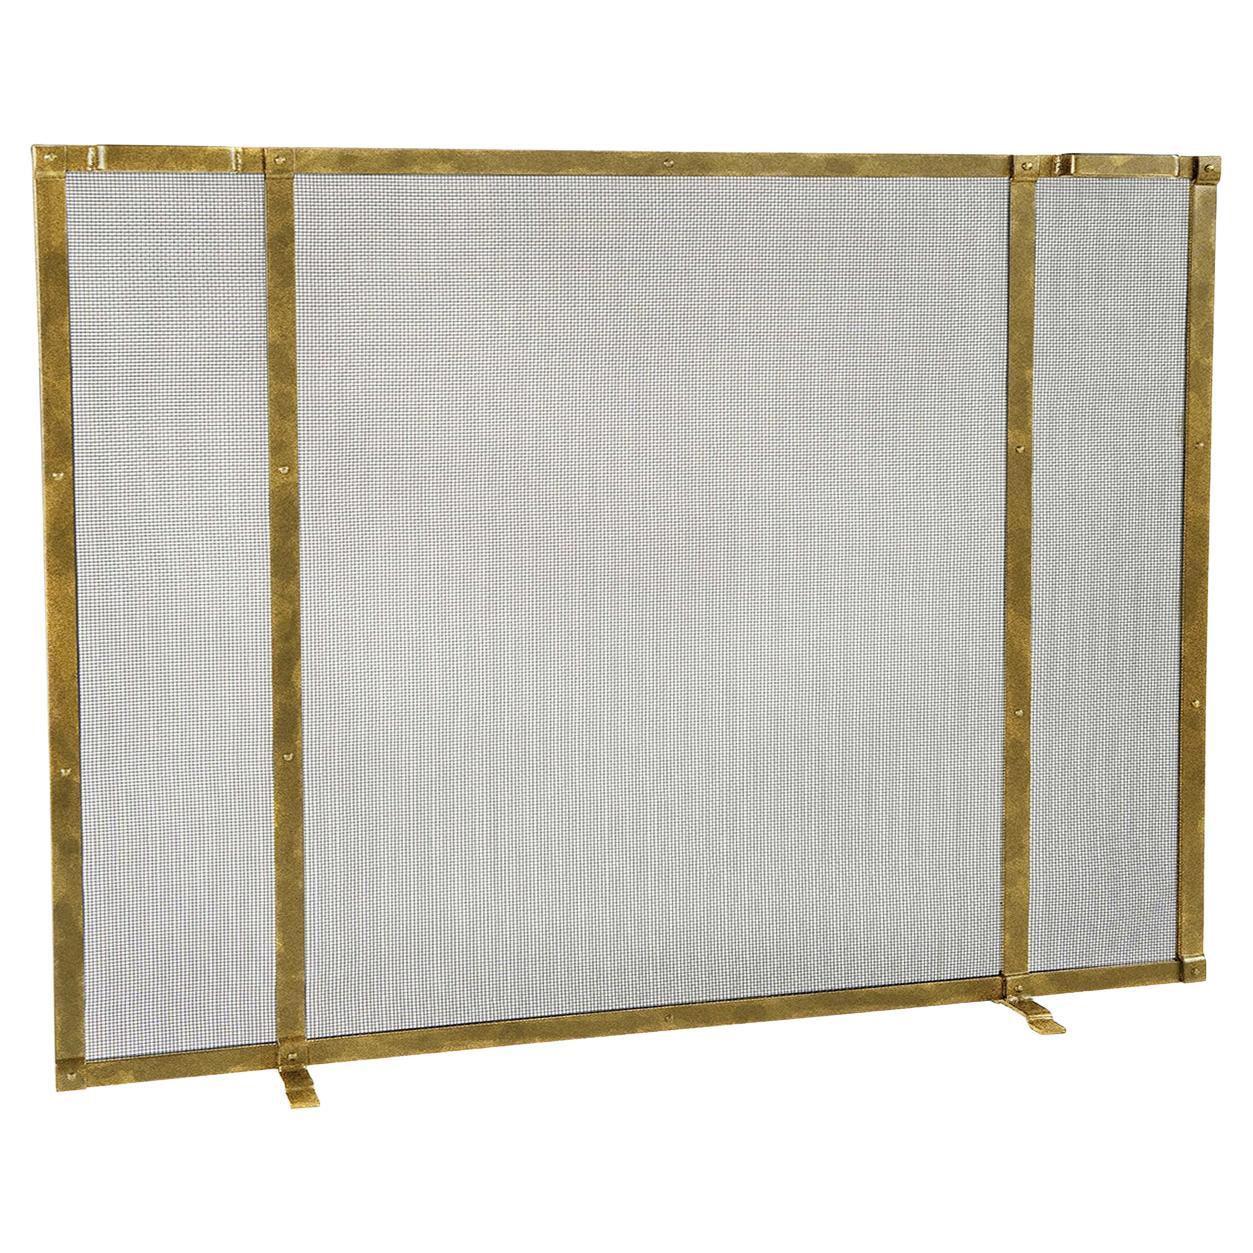 Gunnison Fireplace Screen in a Aged Gold Finish For Sale